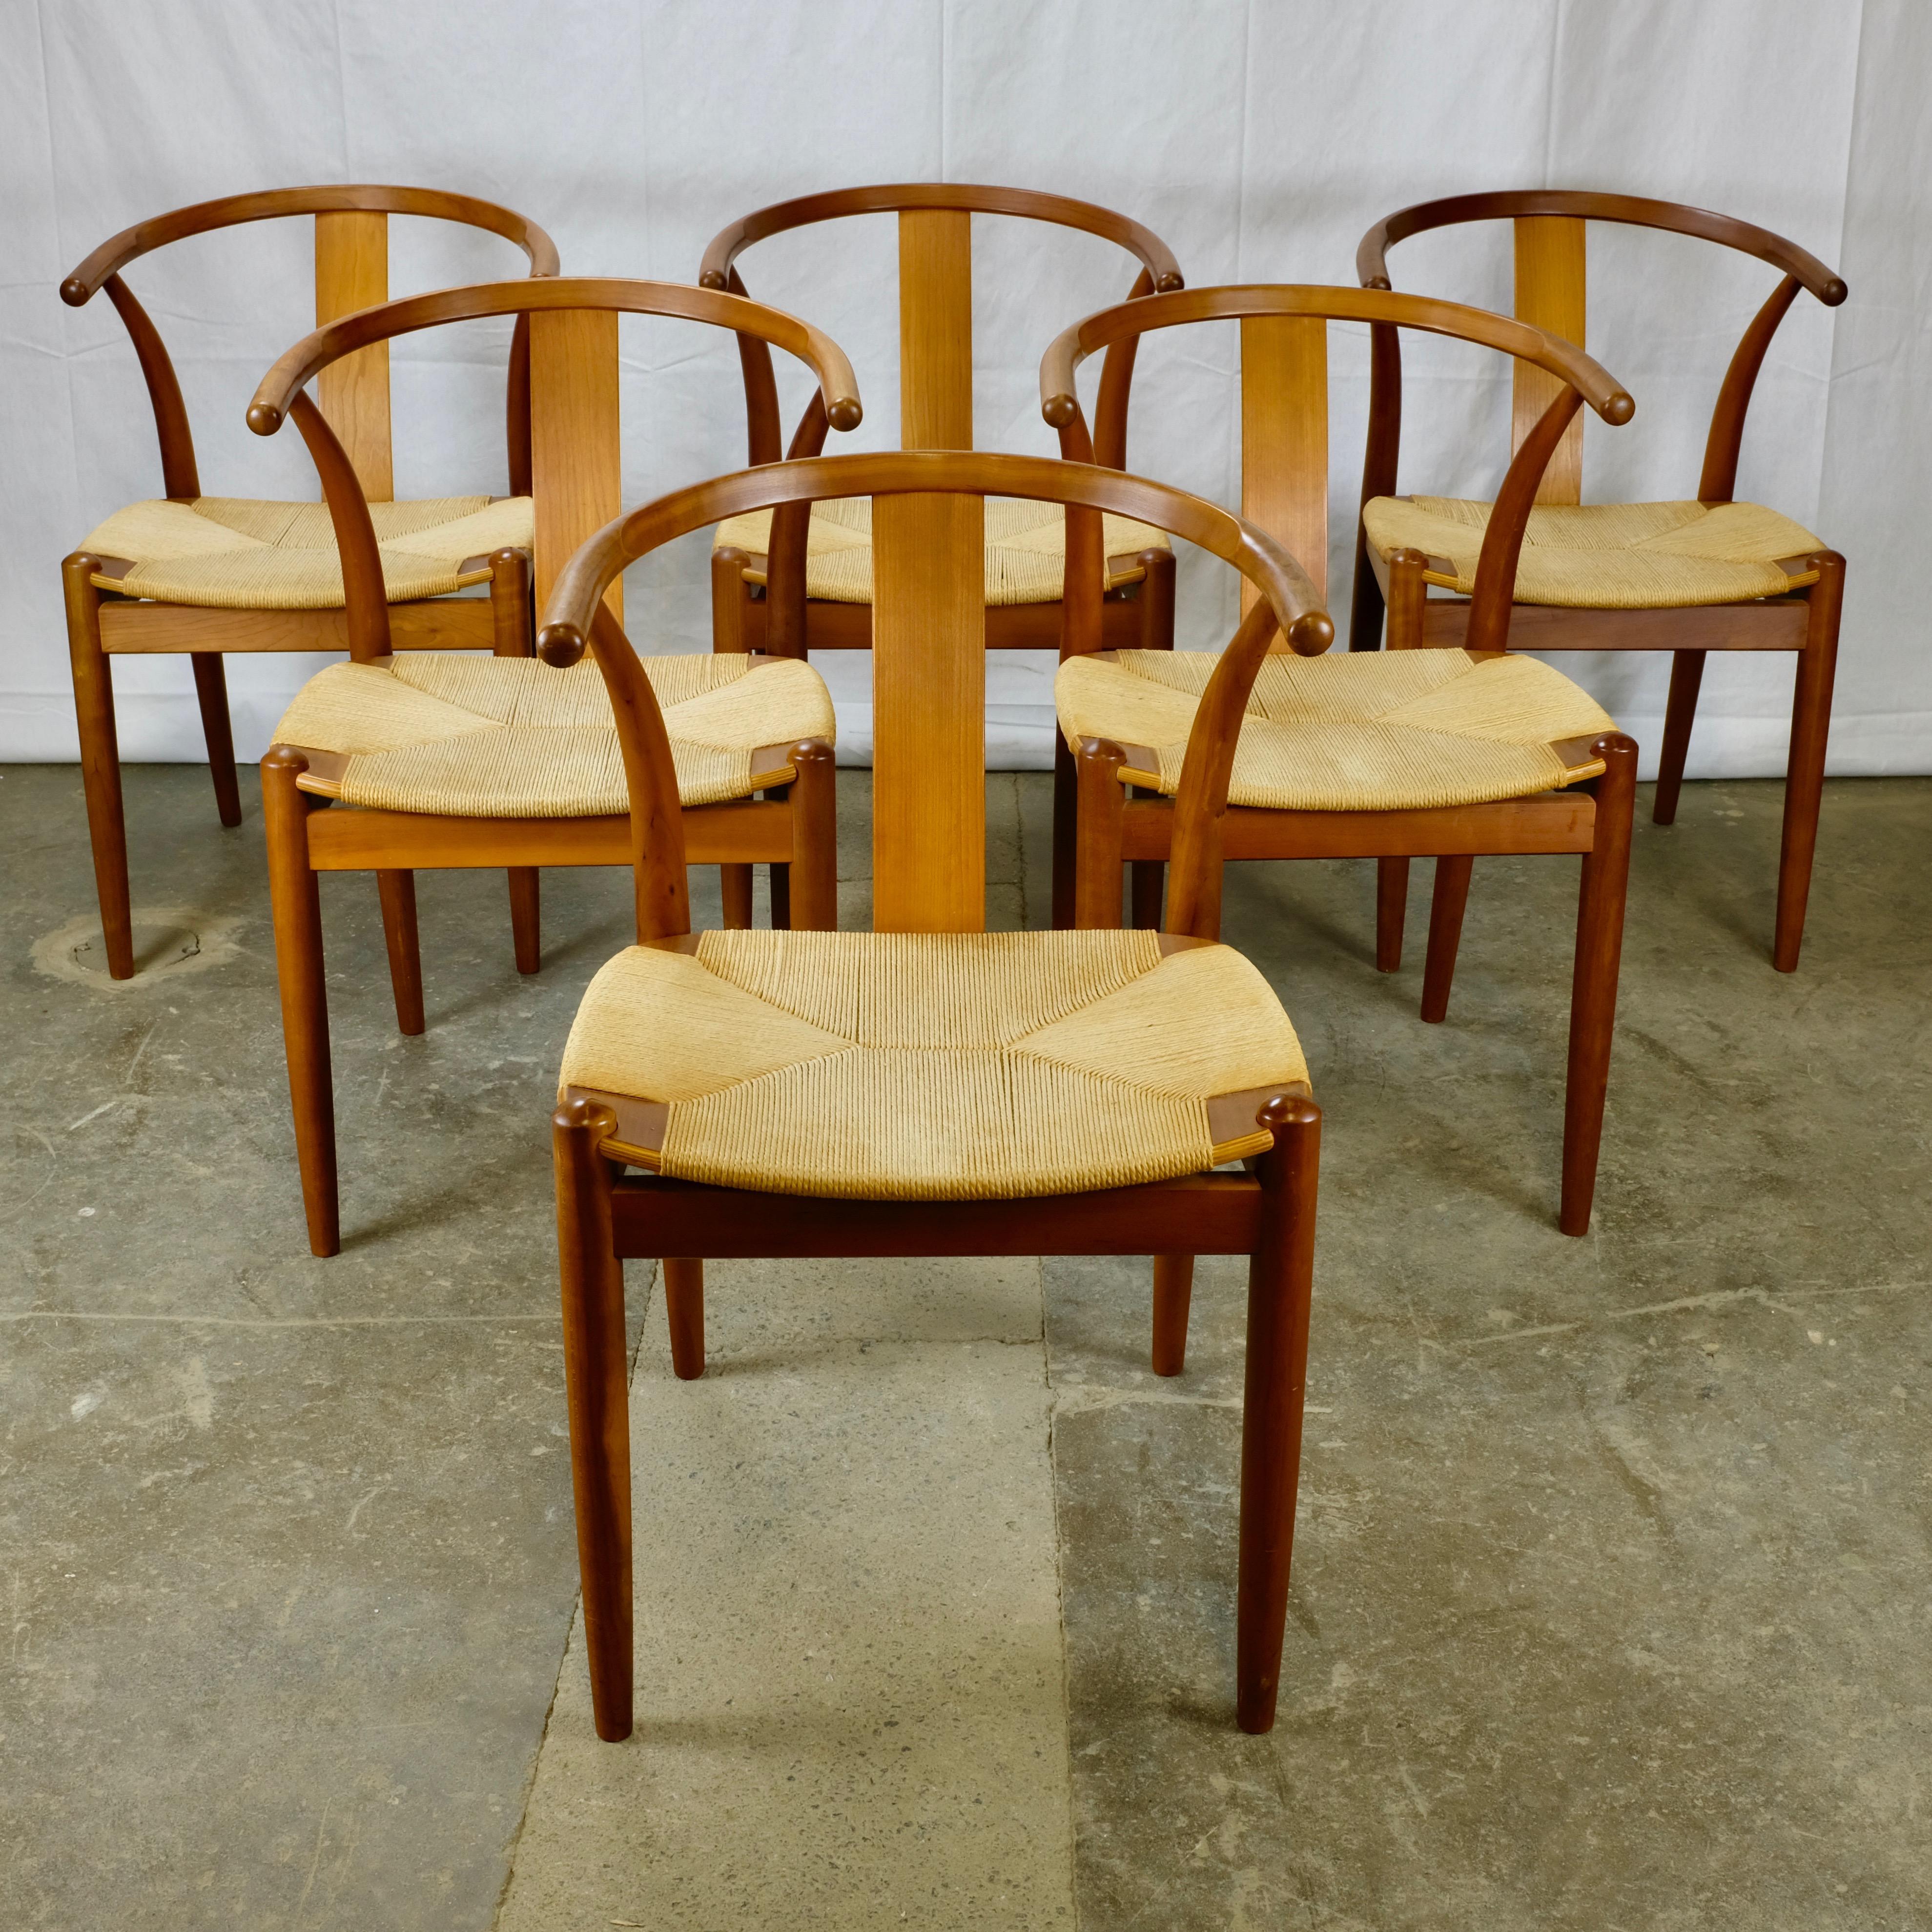 Set of six dining chairs

The frames are solid cherry and feature a curved toprail/armrest supported by the rear legs and by a Chinese-inspired curved back support.

The seats are paper cord woven in an envelope weave.